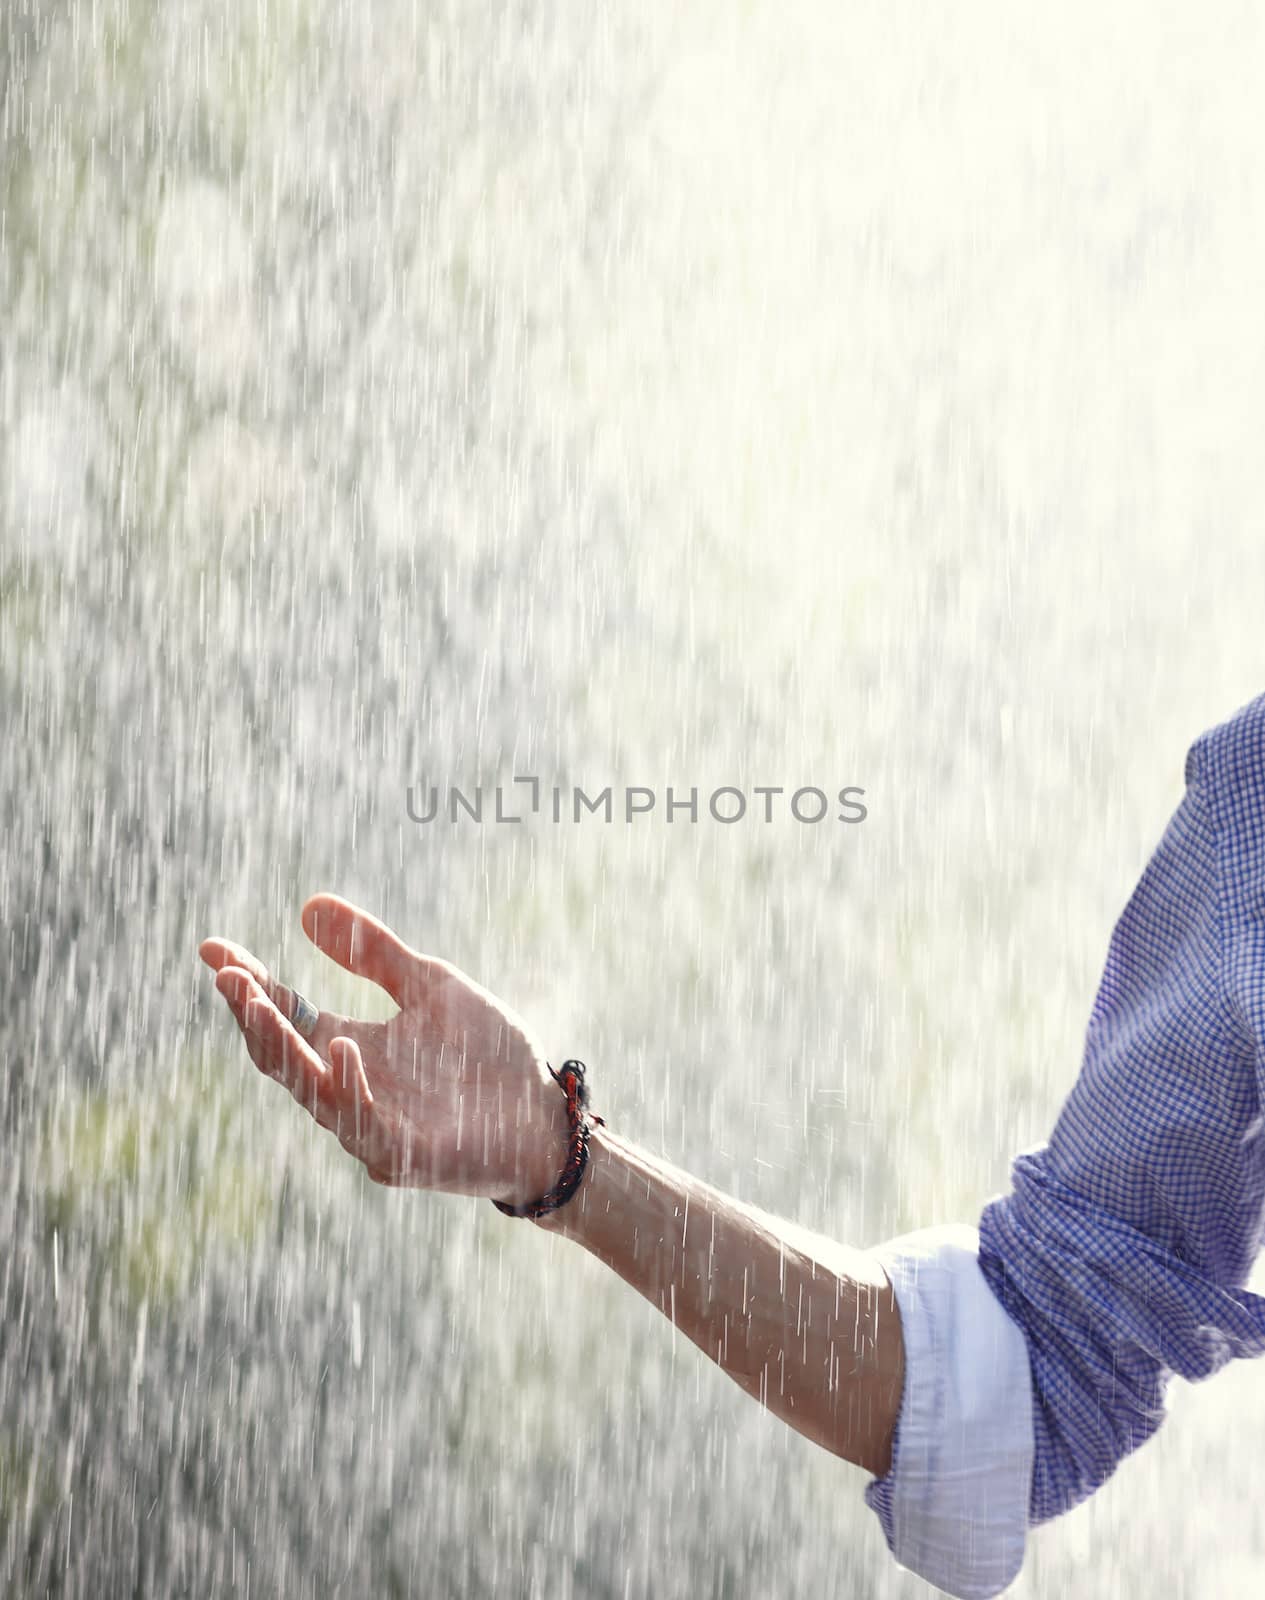 Human hand under the spring or summer rain